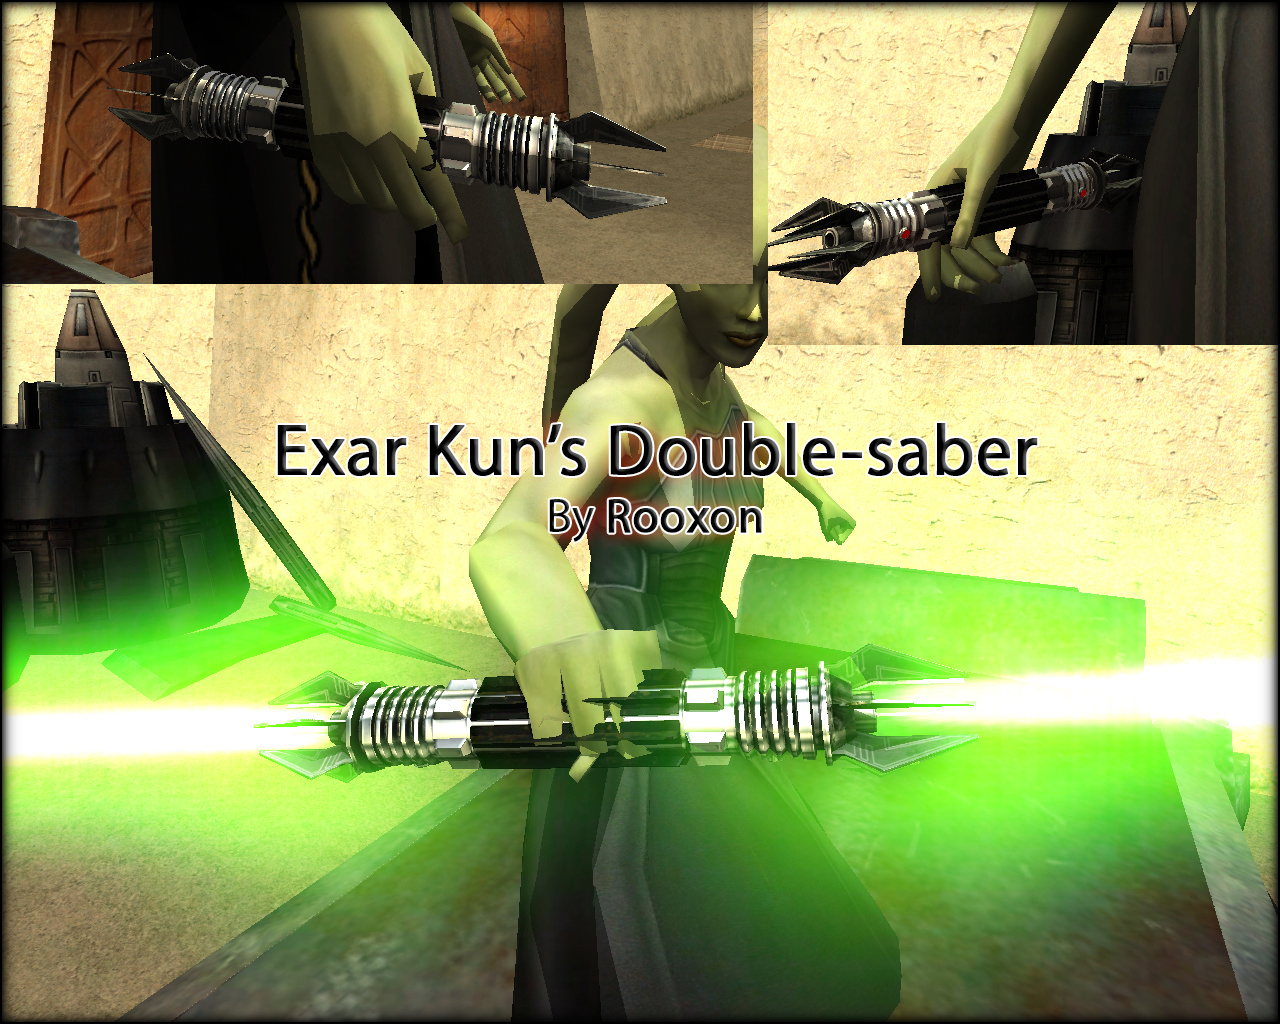 More information about "Exar Kun's Double-saber"